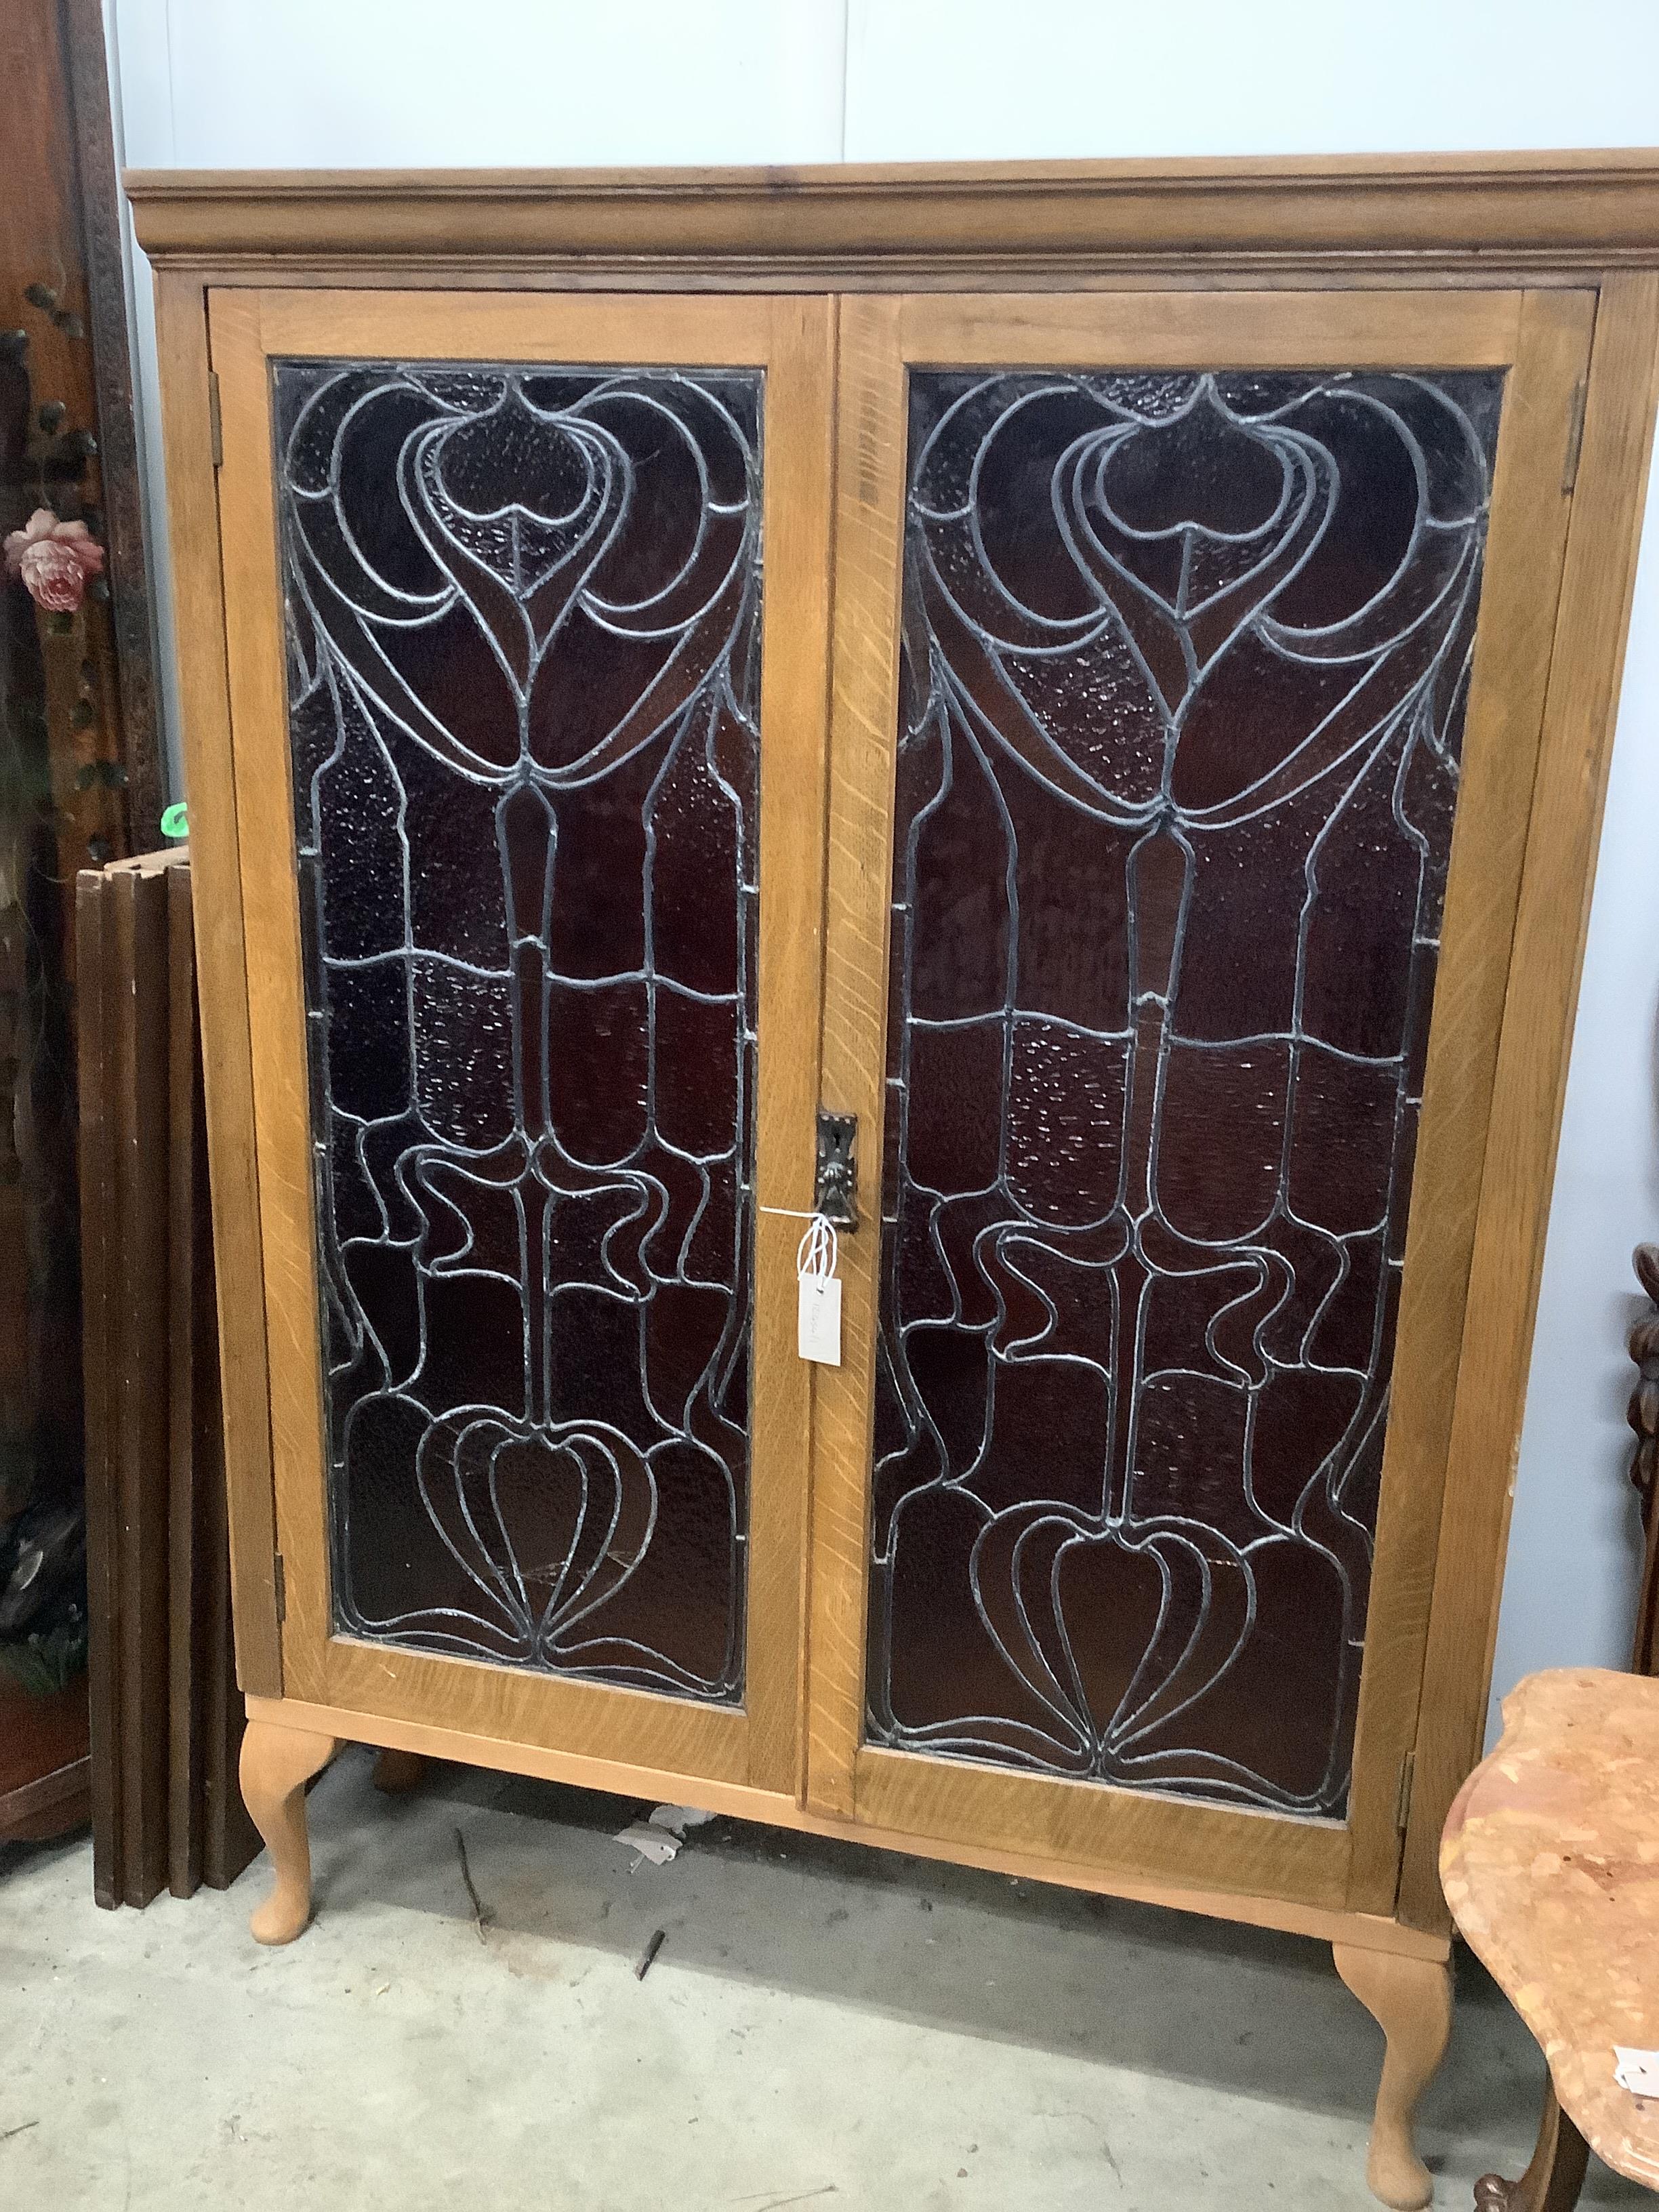 A pair of Art Nouveau stained glass panels, now as an oak bookcase, width 104cm, depth 29cm, height 150cm                                                                                                                   